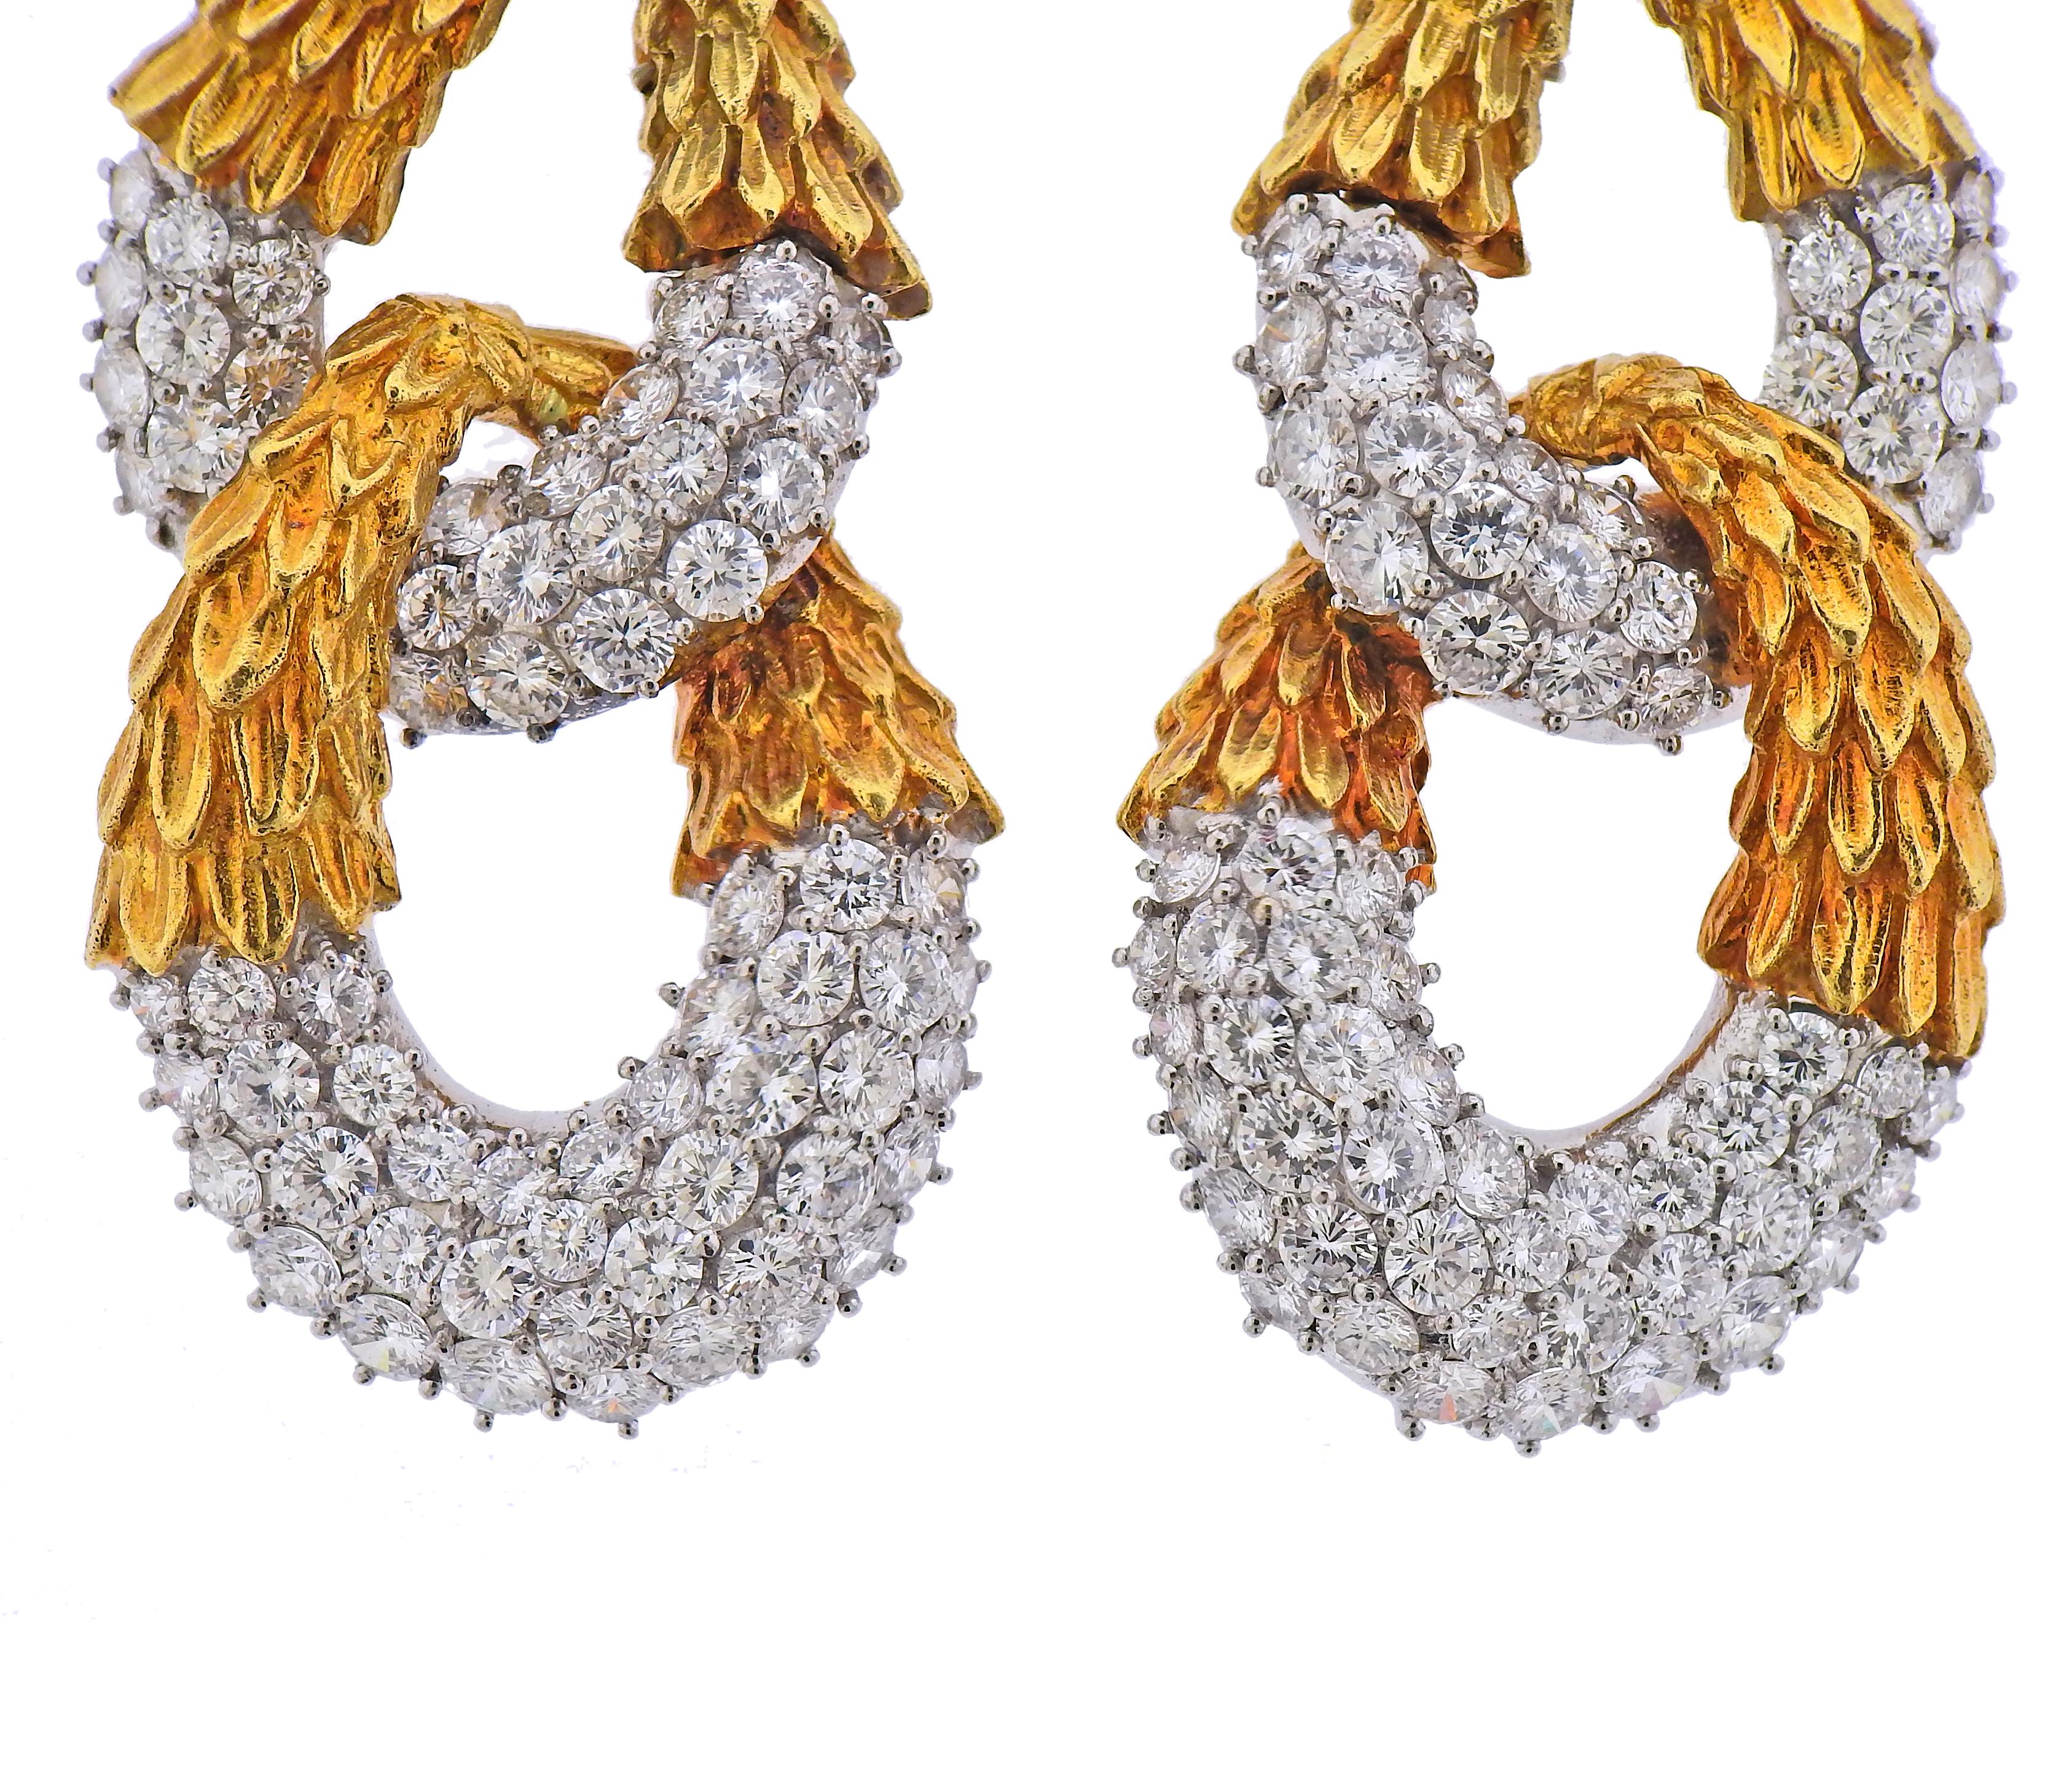 Pair of vintage, circa 1980s impressive earrings with approx. 16 carats in G/VS-Si1 diamonds.   Earrings are 55mm x 27mm.  Weight - 38.5 grams.  